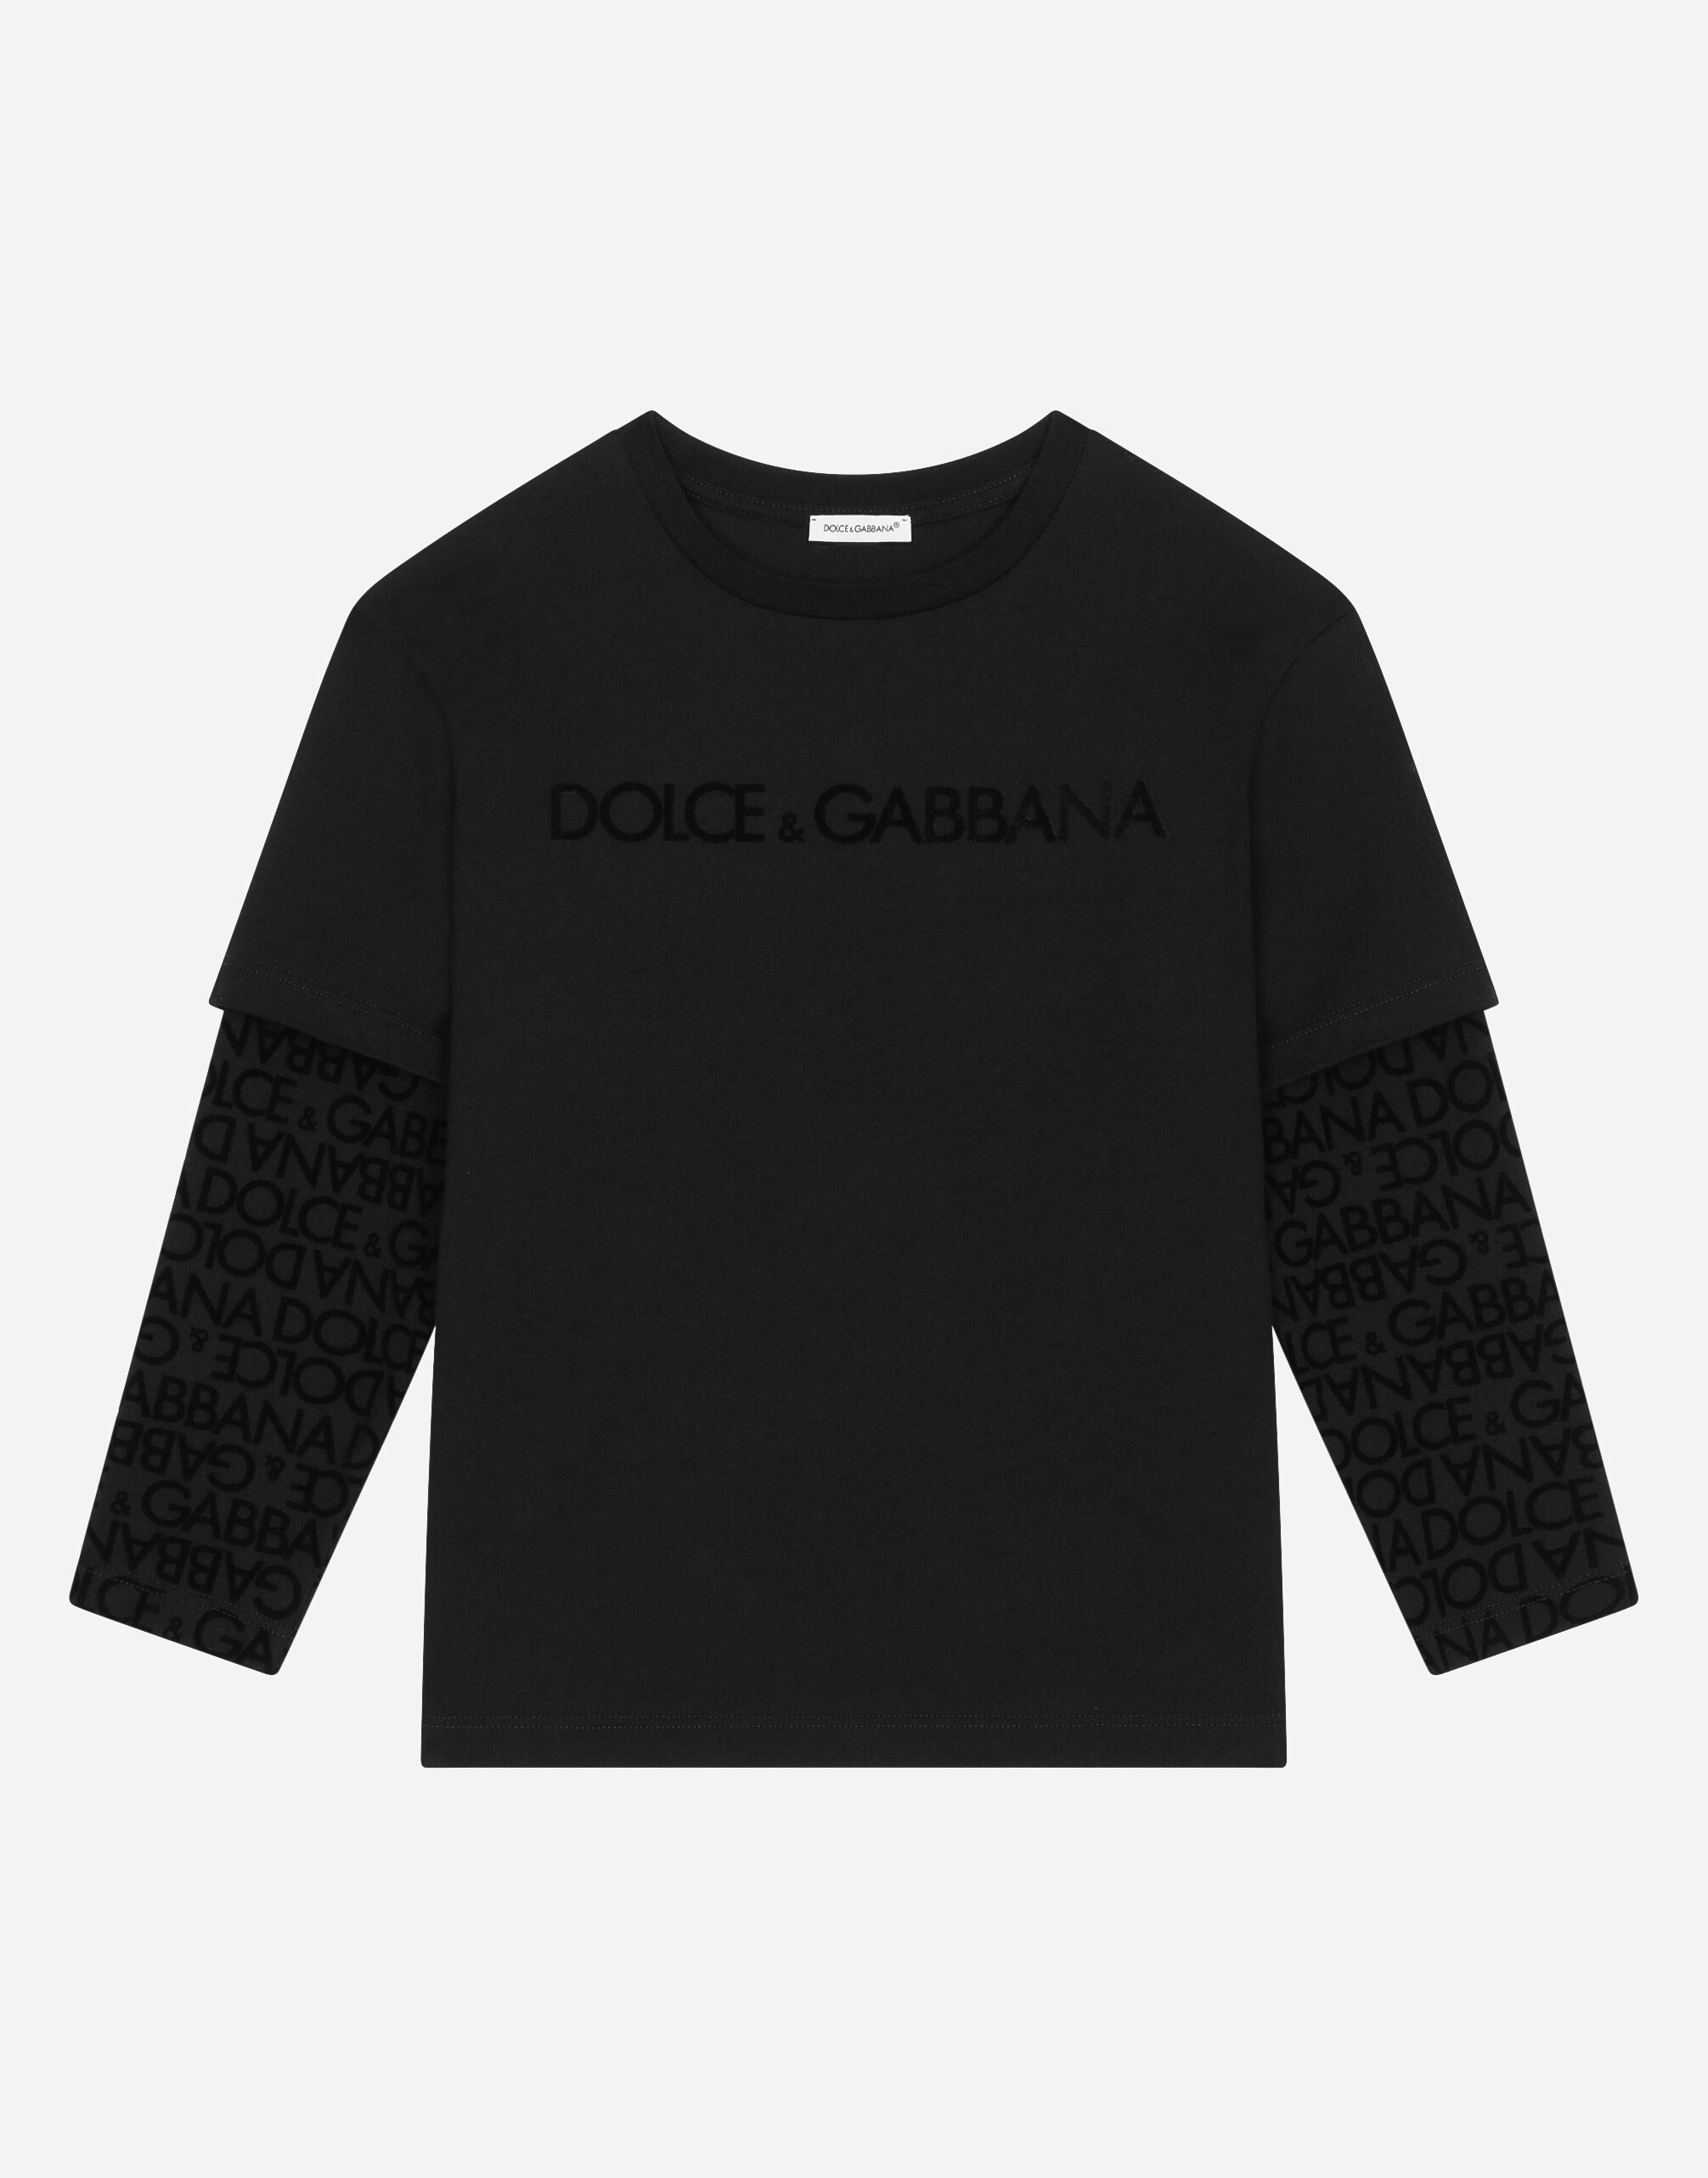 DolceGabbanaSpa Long-sleeved jersey T-shirt with flocked logo print Multicolor L4JWFNHS7MN